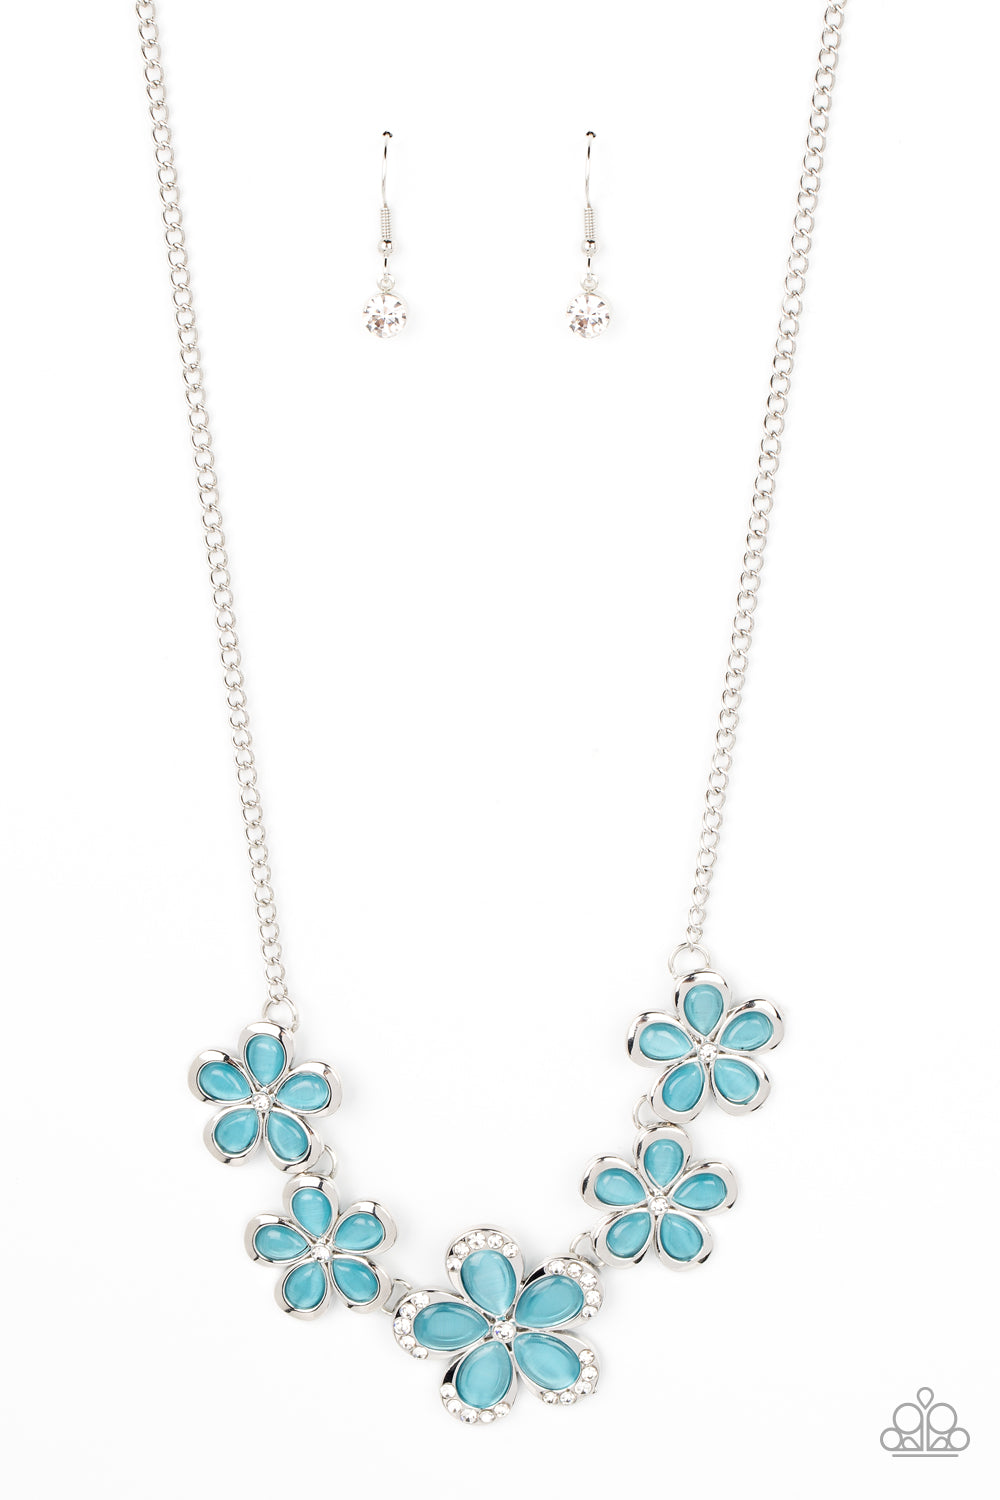 Garden Daydream Blue Necklace - Paparazzi Accessories  Bordered in silver accents, dainty blue cat's eye stone petals bloom from dainty white rhinestone centers, linking into ethereal blossoms below the collar. The centermost daisy is dotted in glassy white rhinestones, adding dazzling dimension to the floral fairytale. Features an adjustable clasp closure.  Sold as one individual necklace. Includes one pair of matching earrings.  P2RE-BLXX-375XX